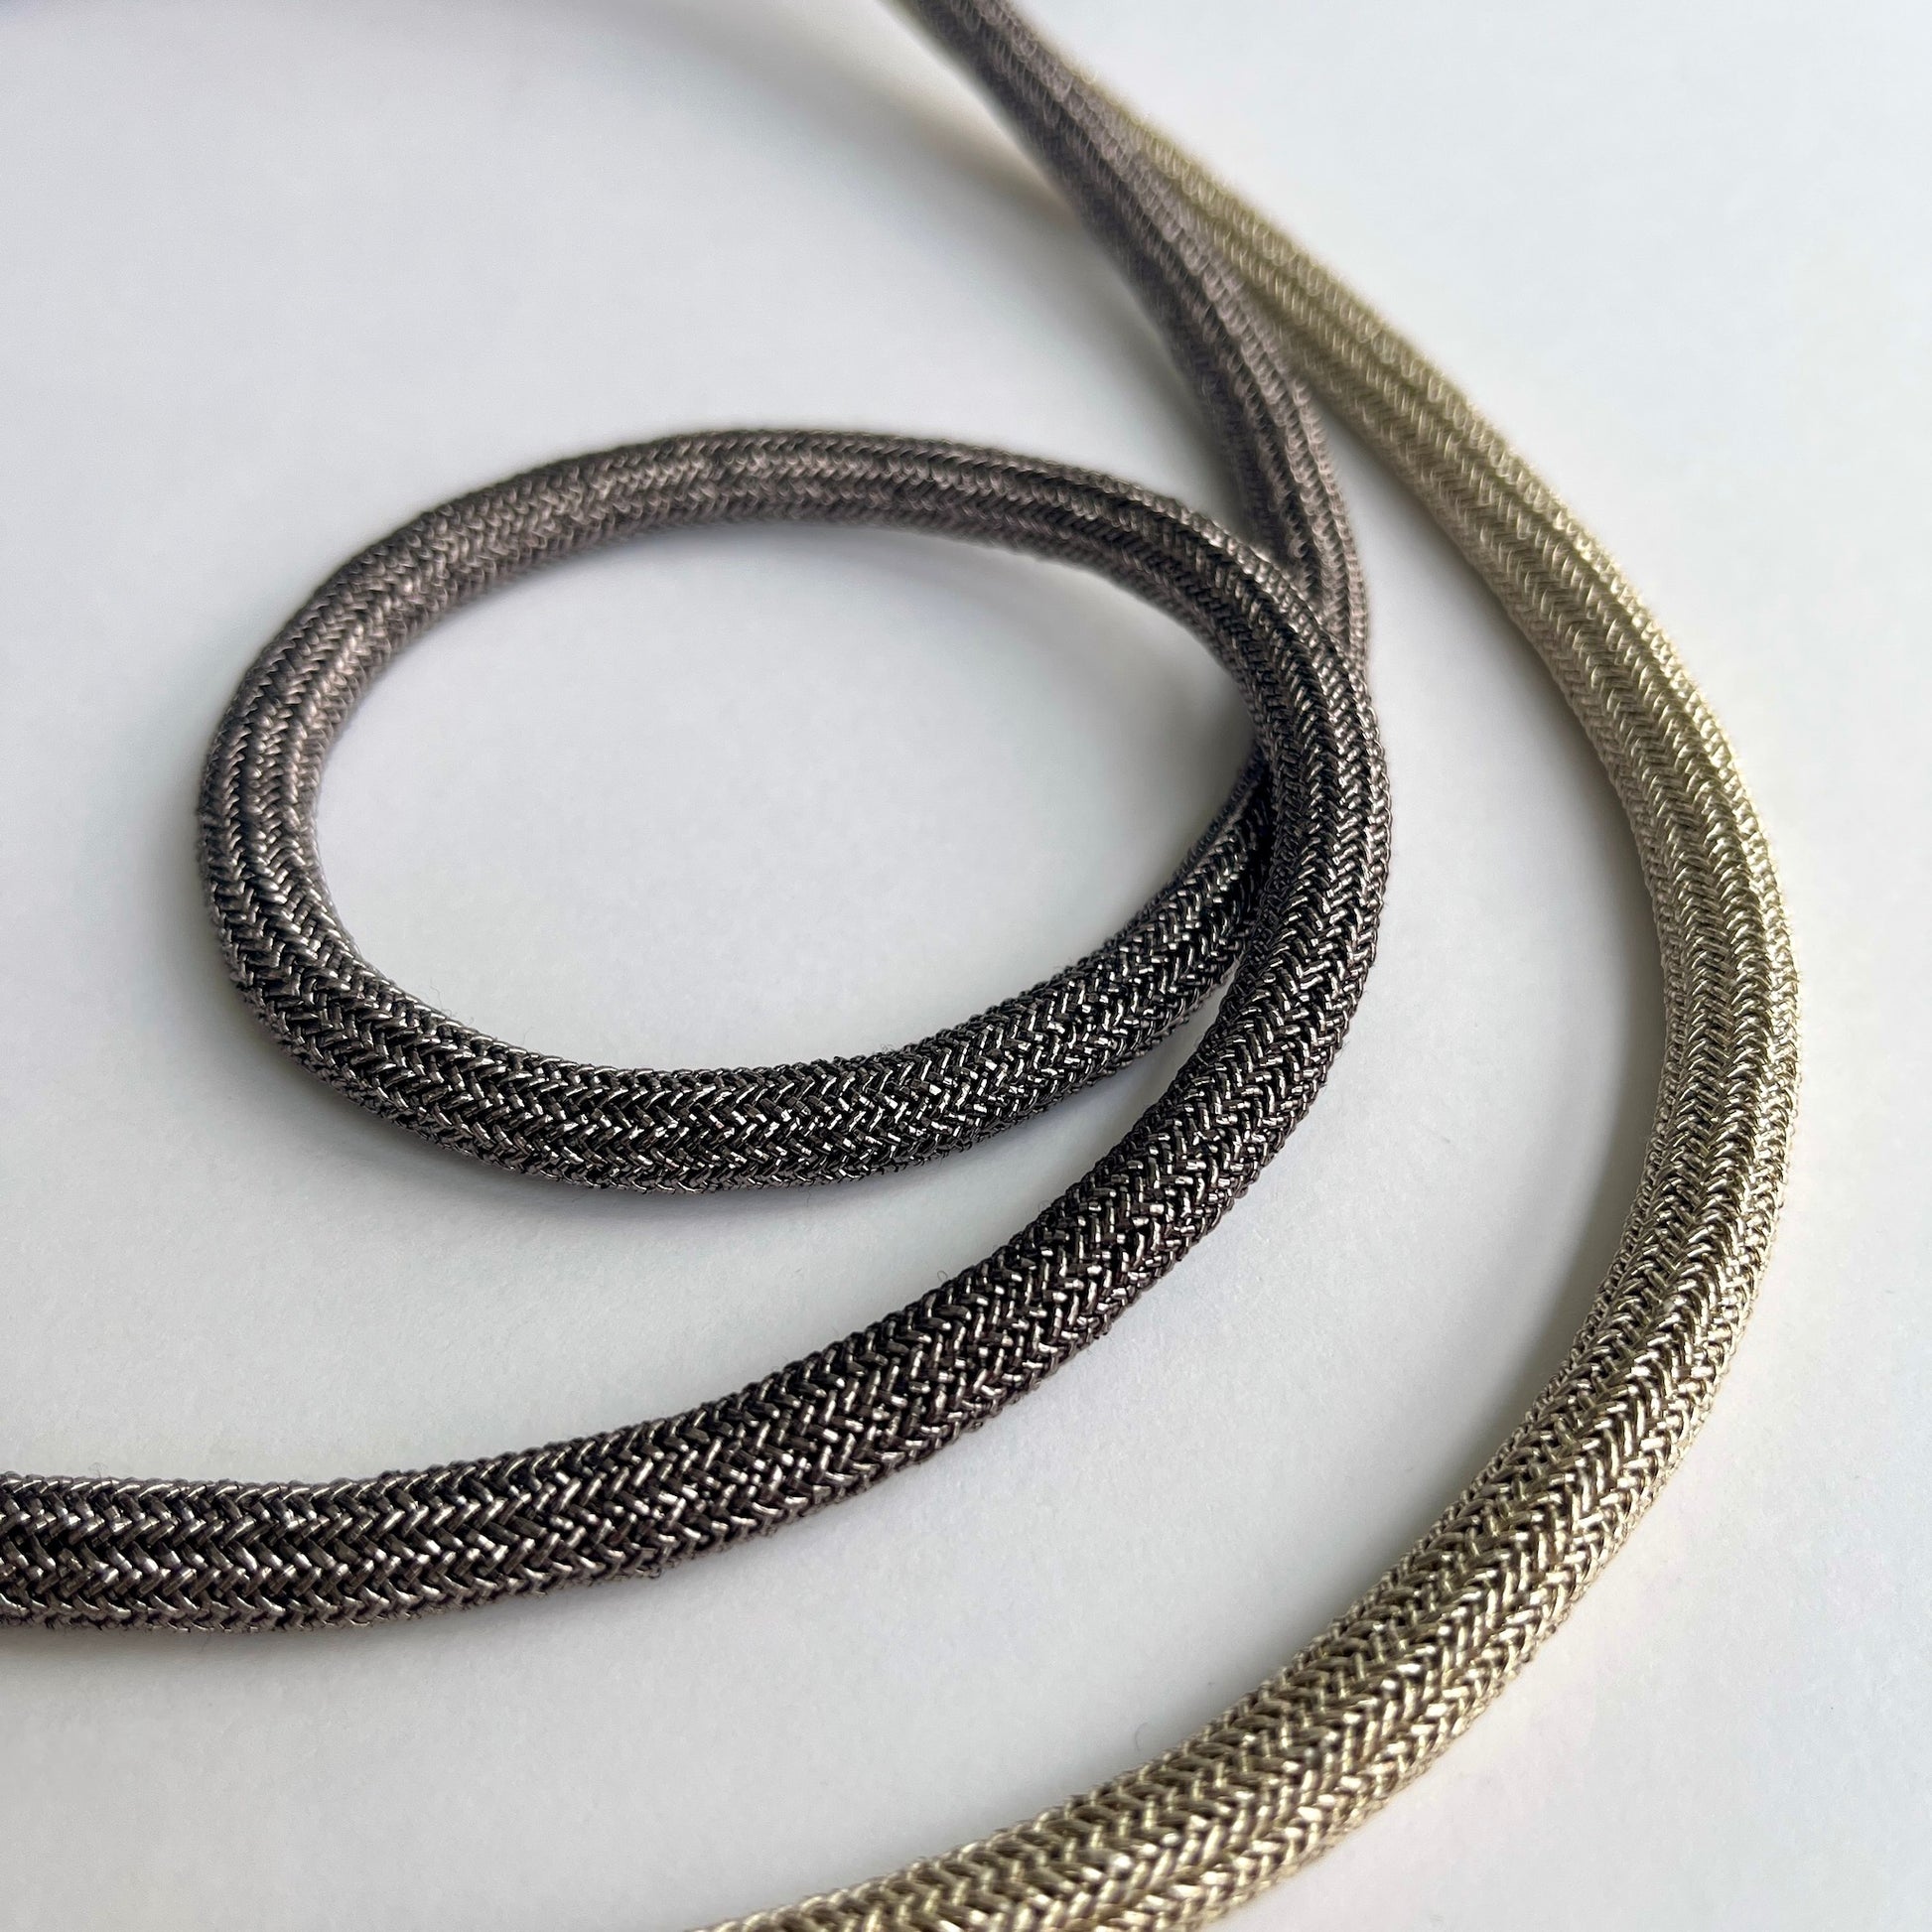 Metallic Woven Tubular Braid  Add a little luxe and glamour to any outfit with our fancy cord! Perfect for hoodies, joggers, drawstrings, belts, costume and theatre design, upholstery and crafting.